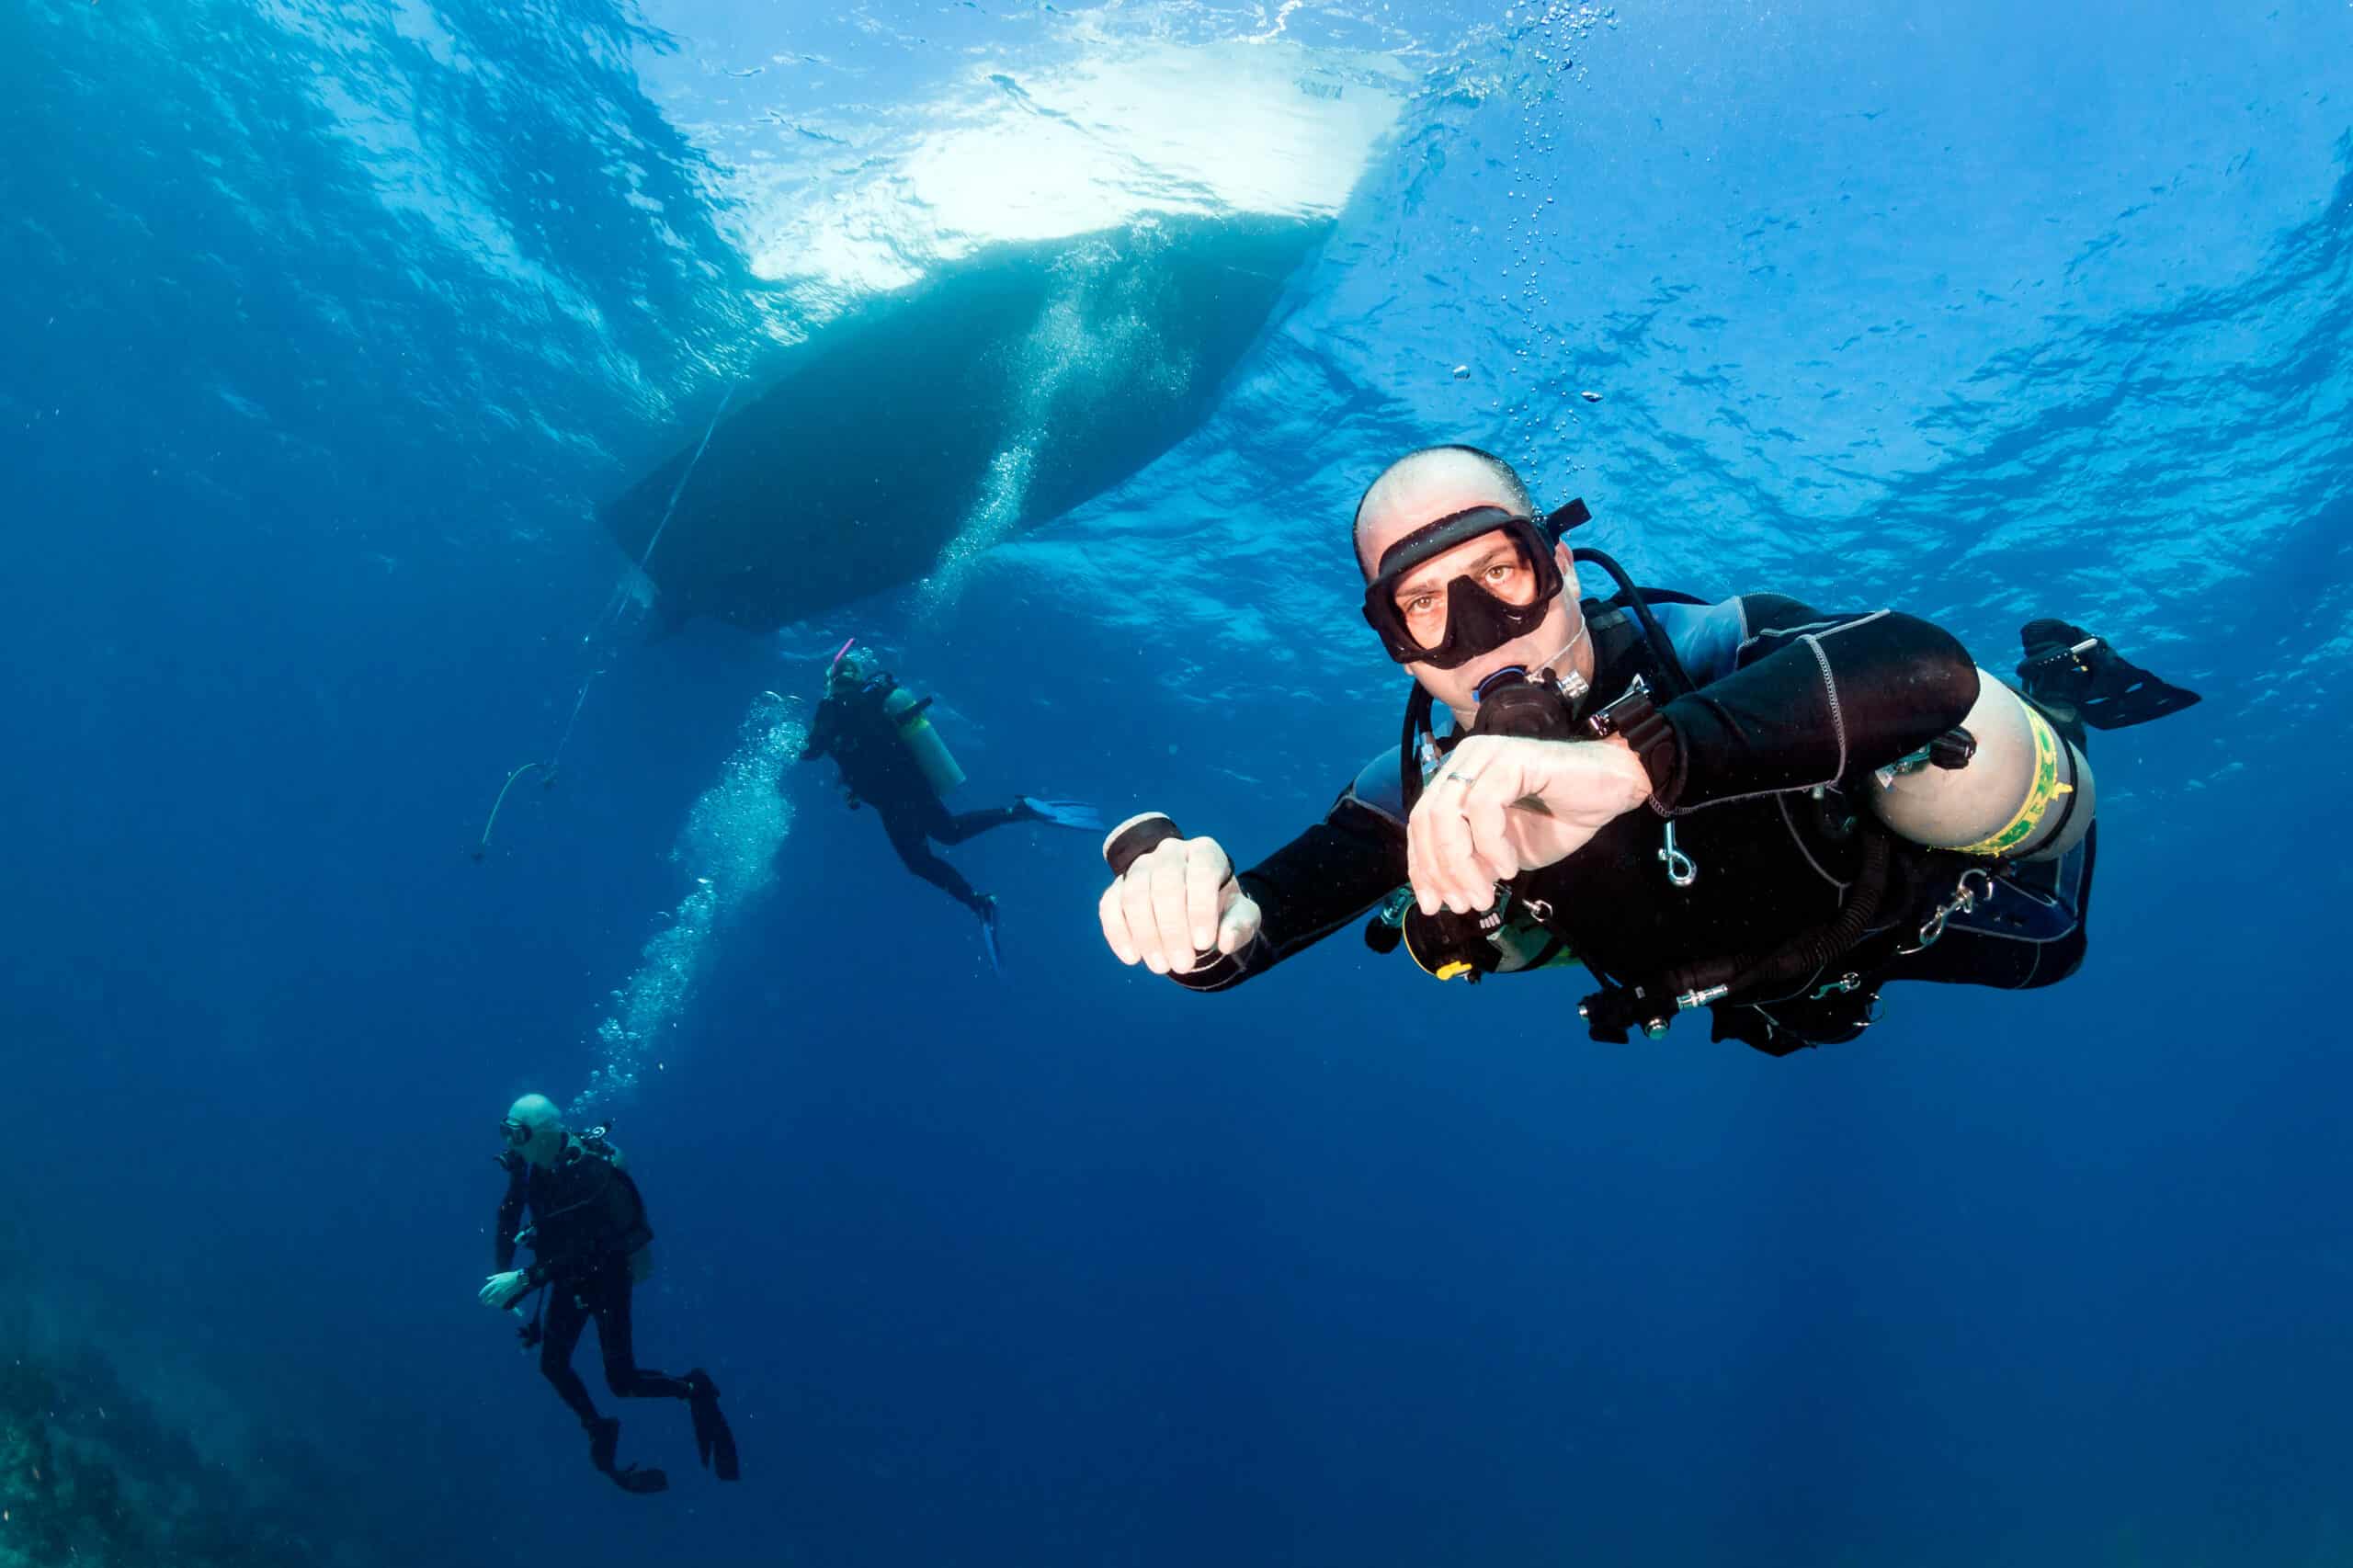 How Many Scuba Dives Per Day?